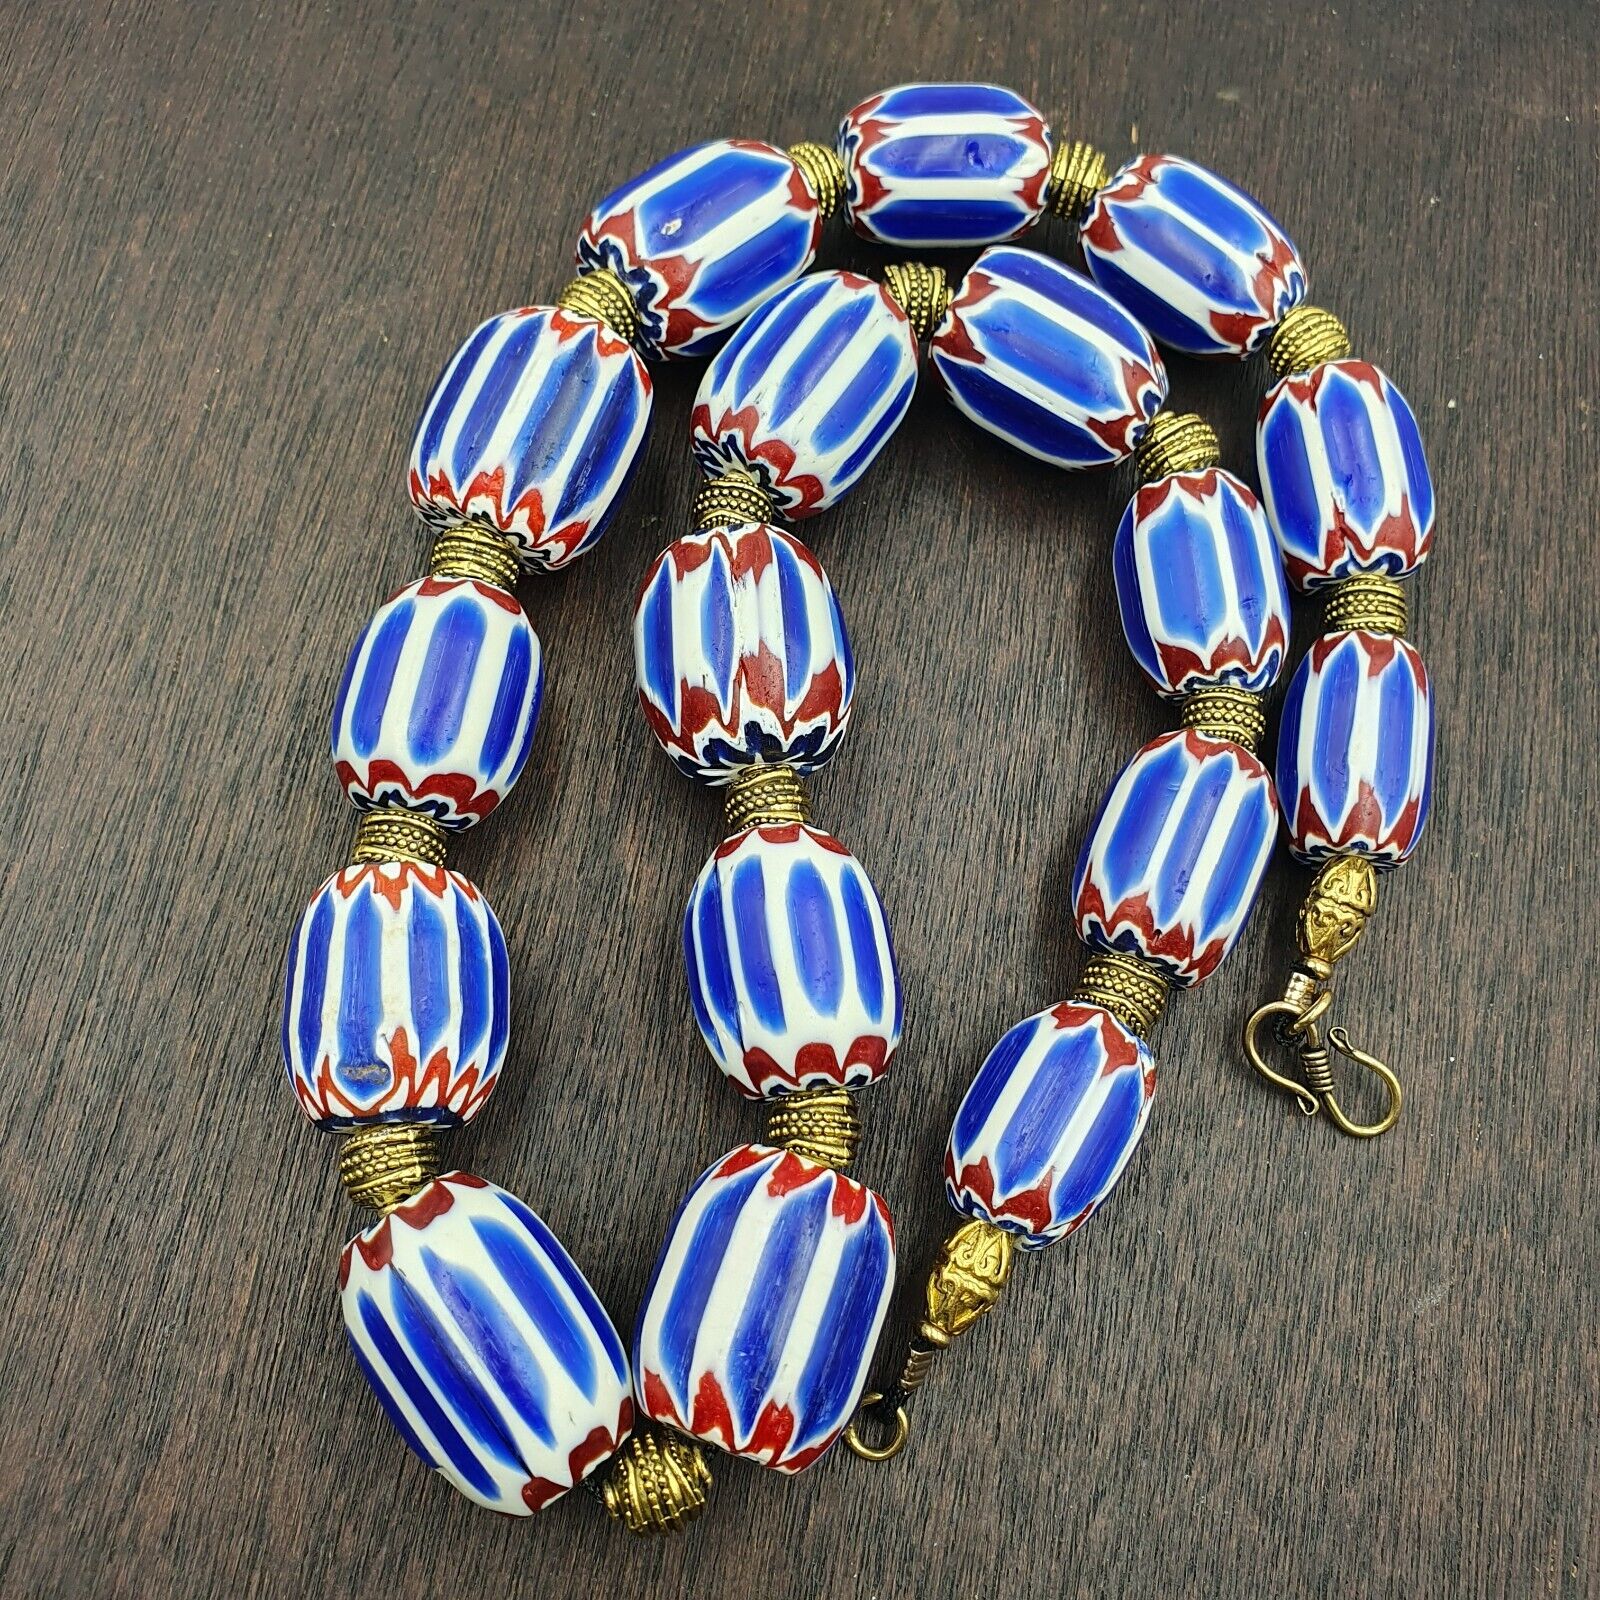 AA Vinatage Venetian inspired Trade  Blue Chevron Glass Beads Necklace NCH-1